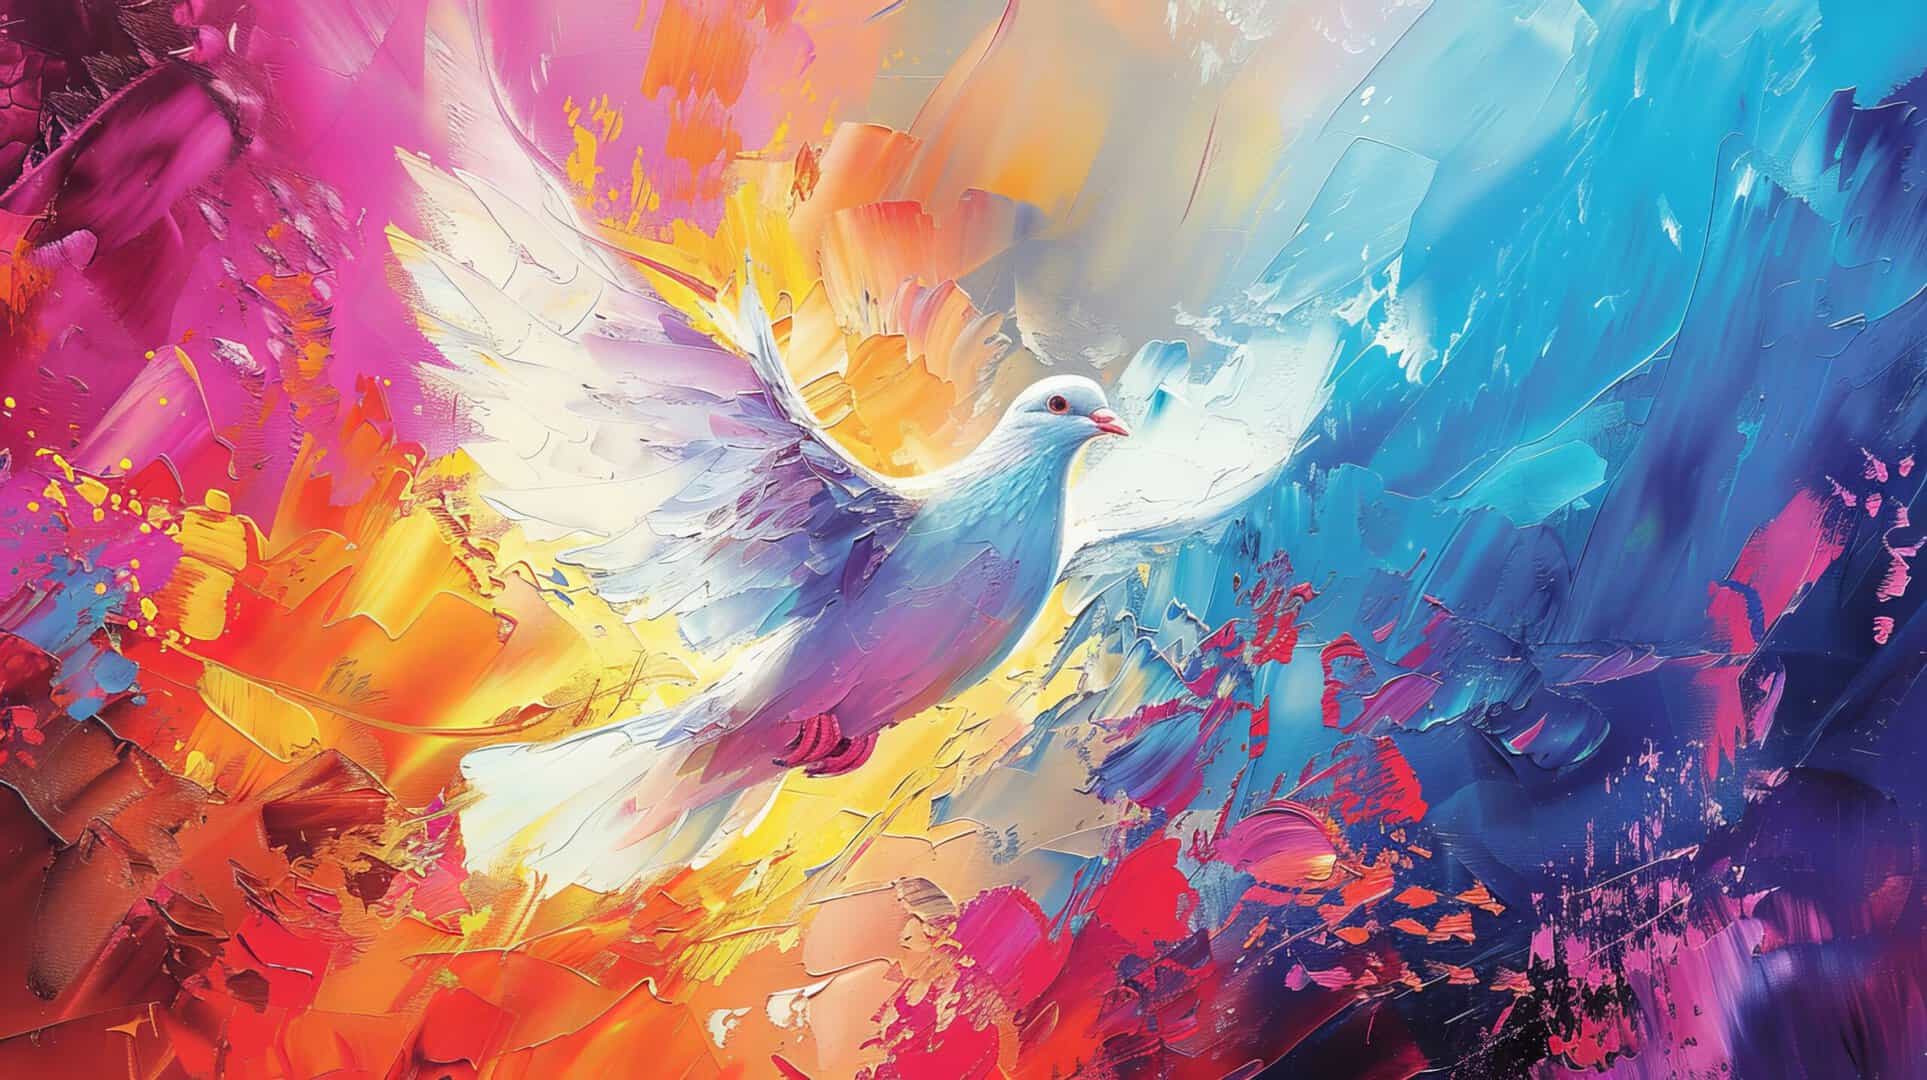 A dramatic, colorful painting of dove symbolizing hope in addiction recovery.